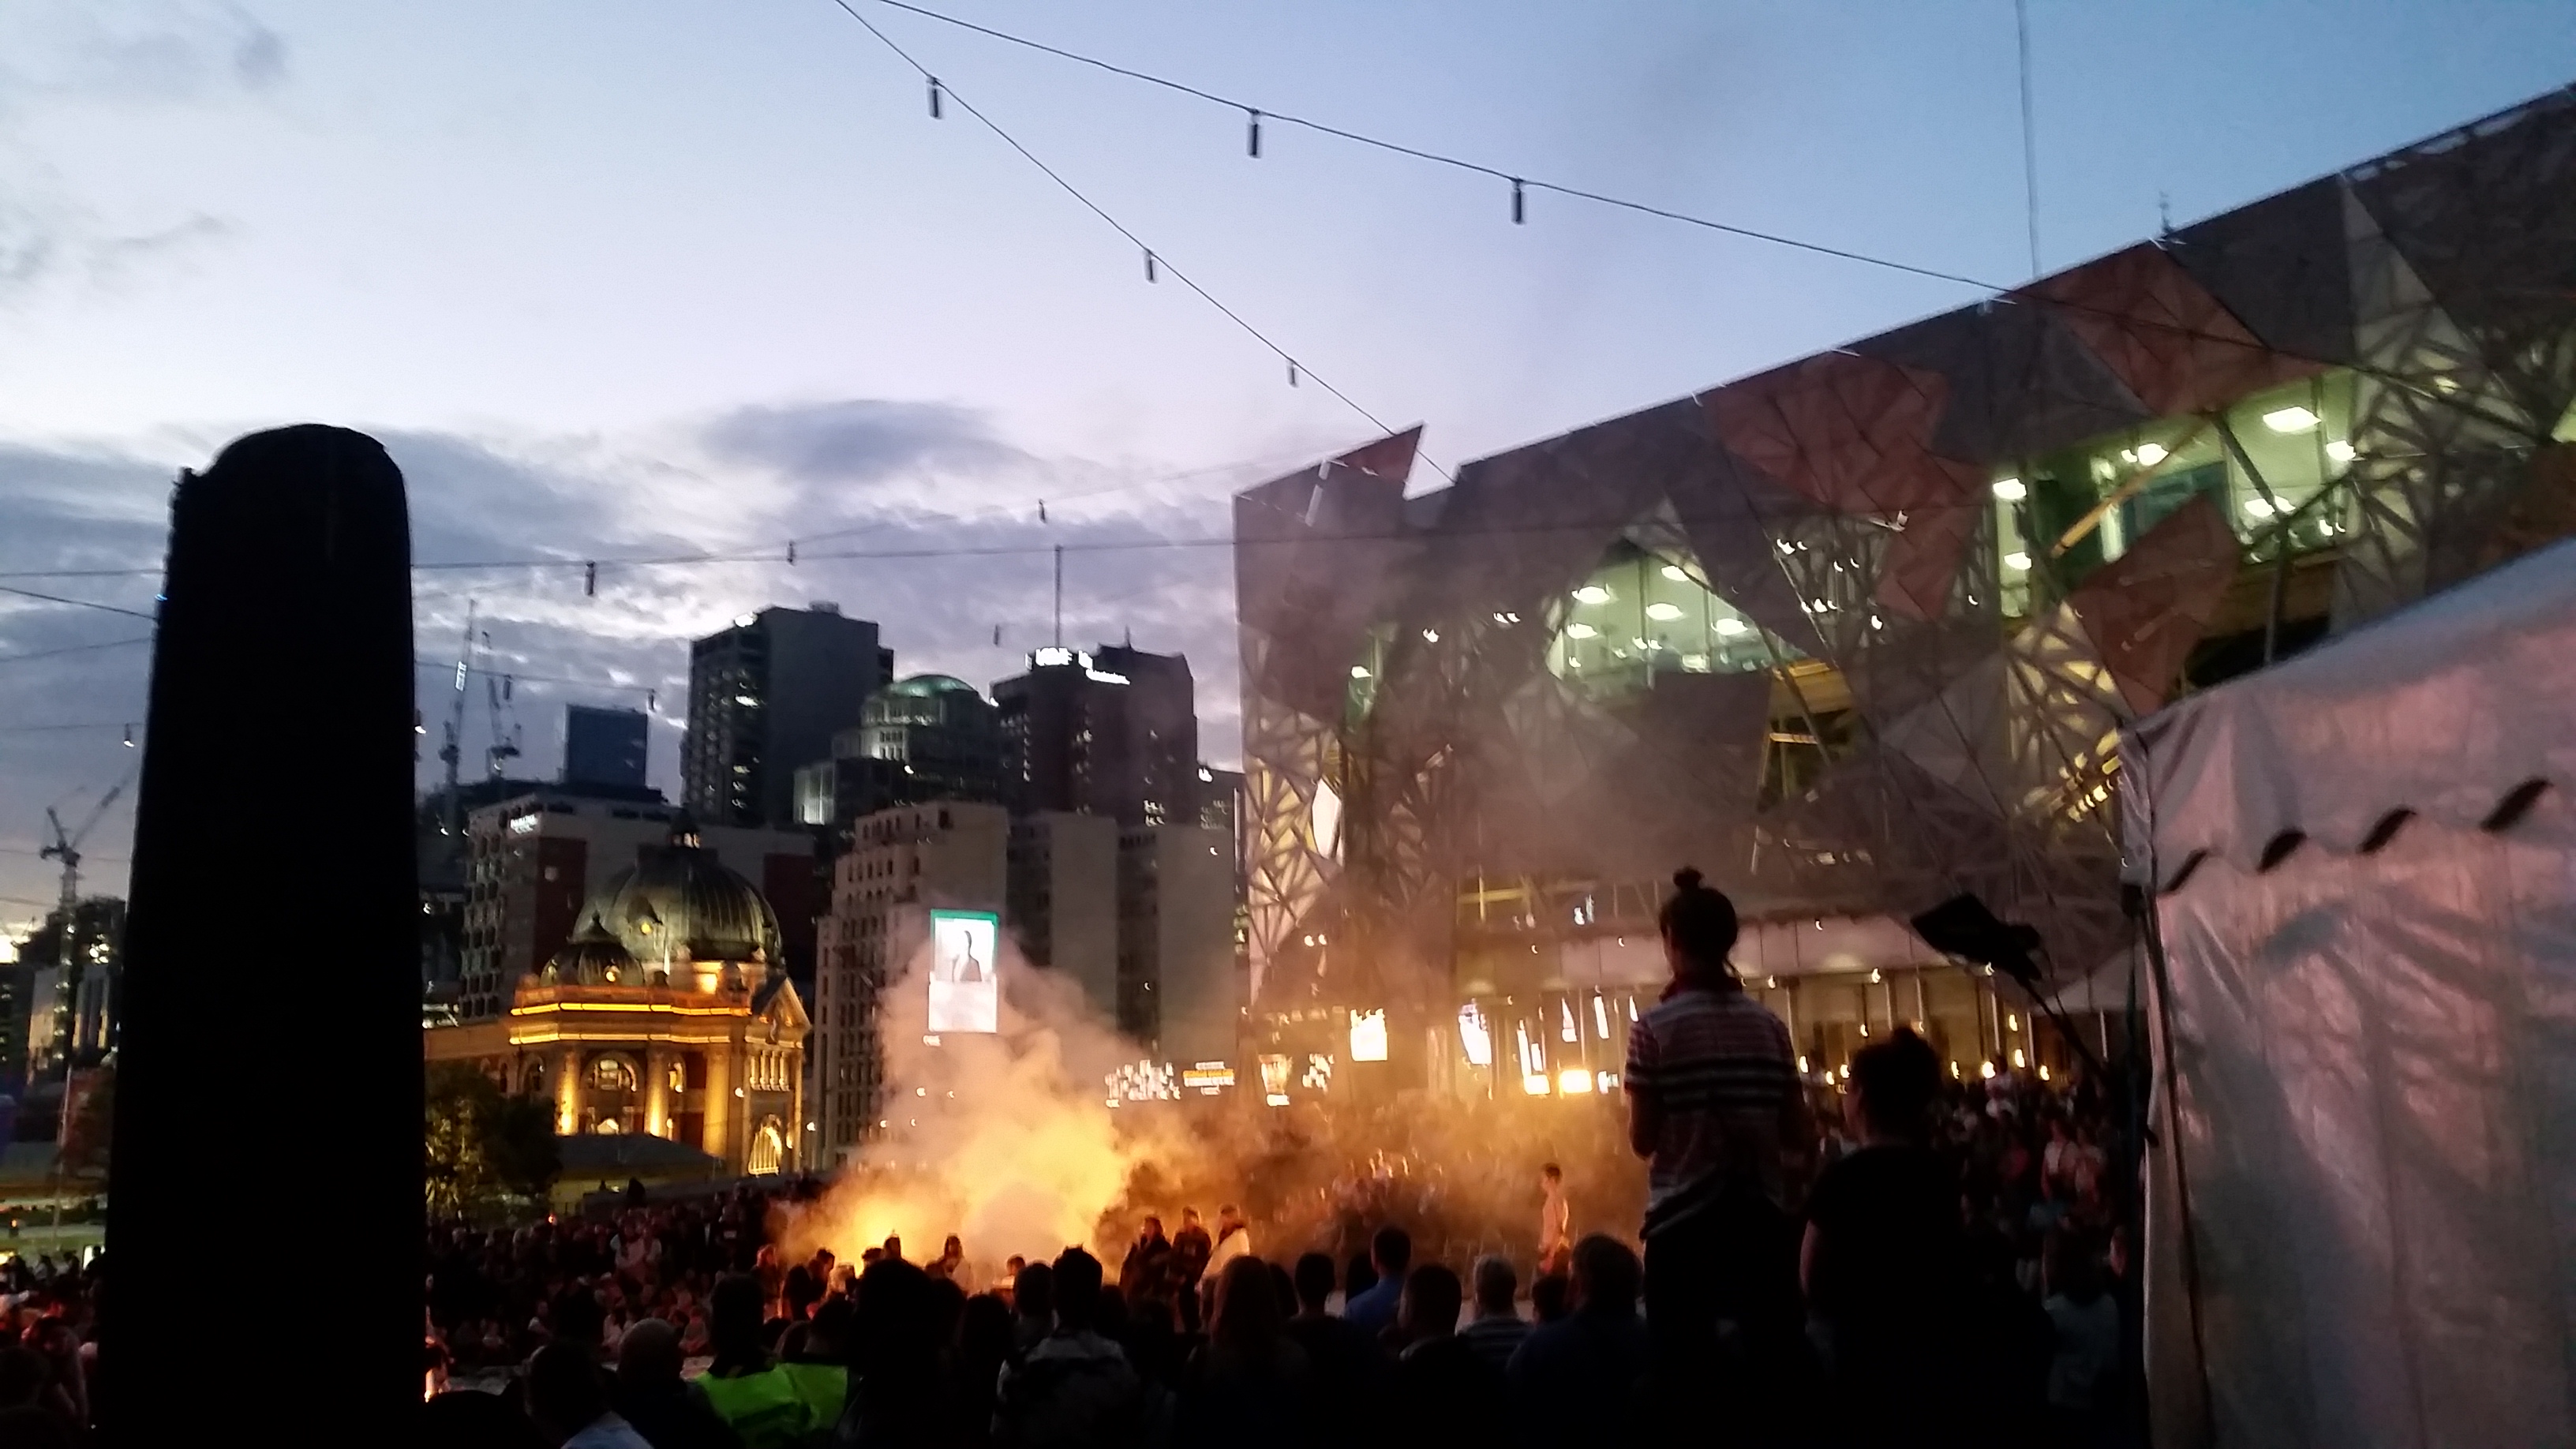 An Aboriginal Ceremony at Fed Square